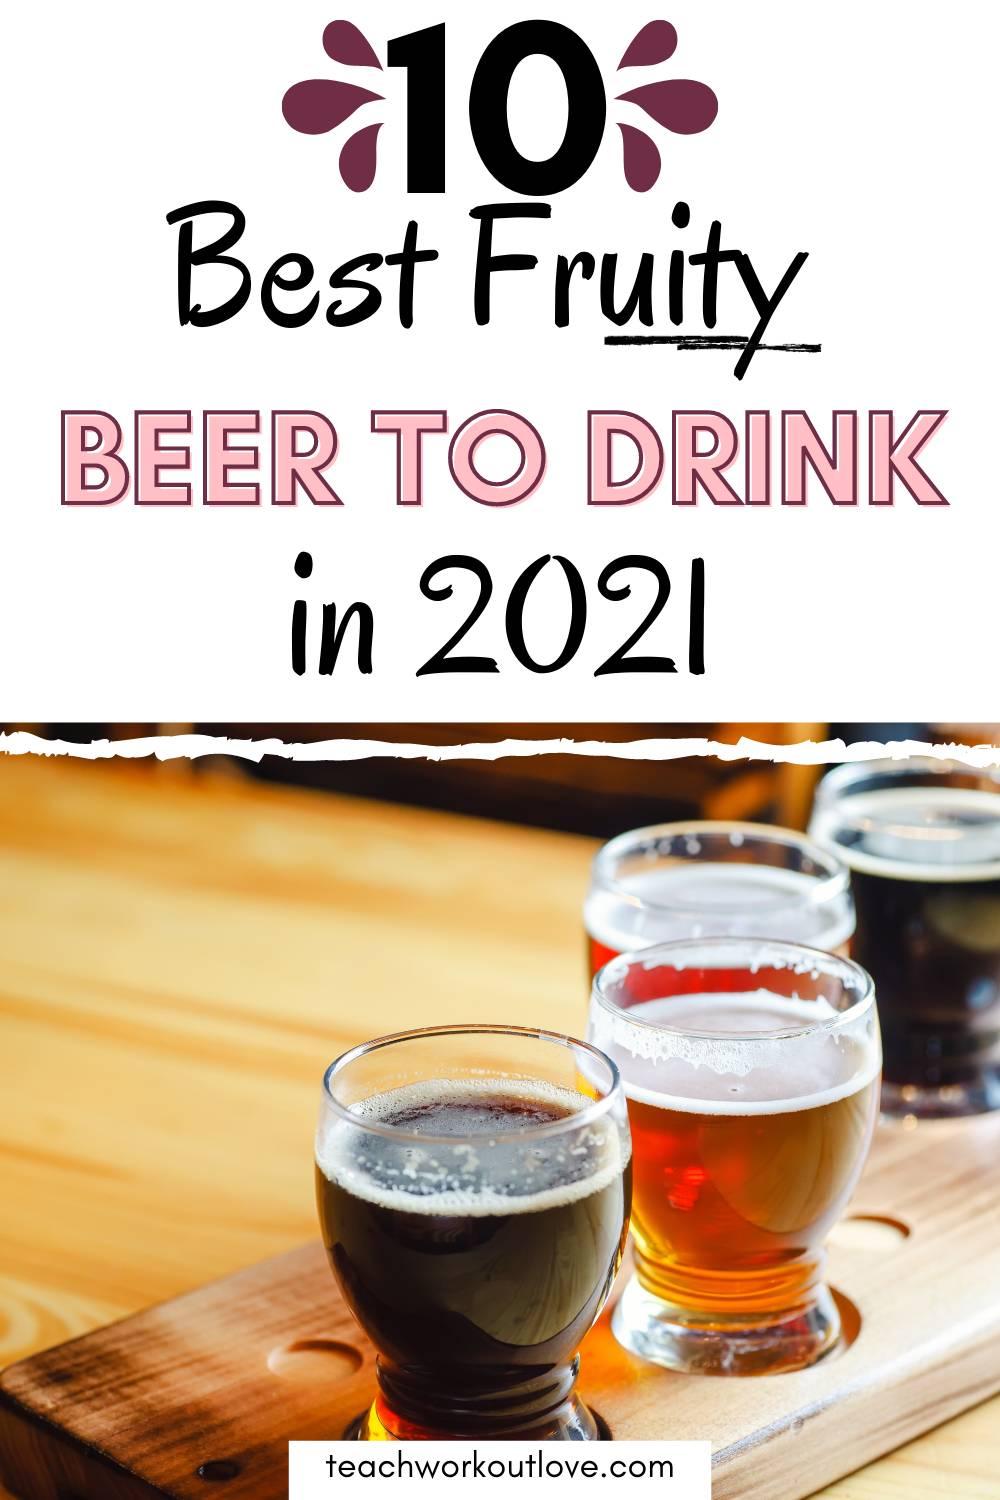 Check out the TWL's list of the 10 best fruit beers that you should try this year. You'll be sipping these all year round.